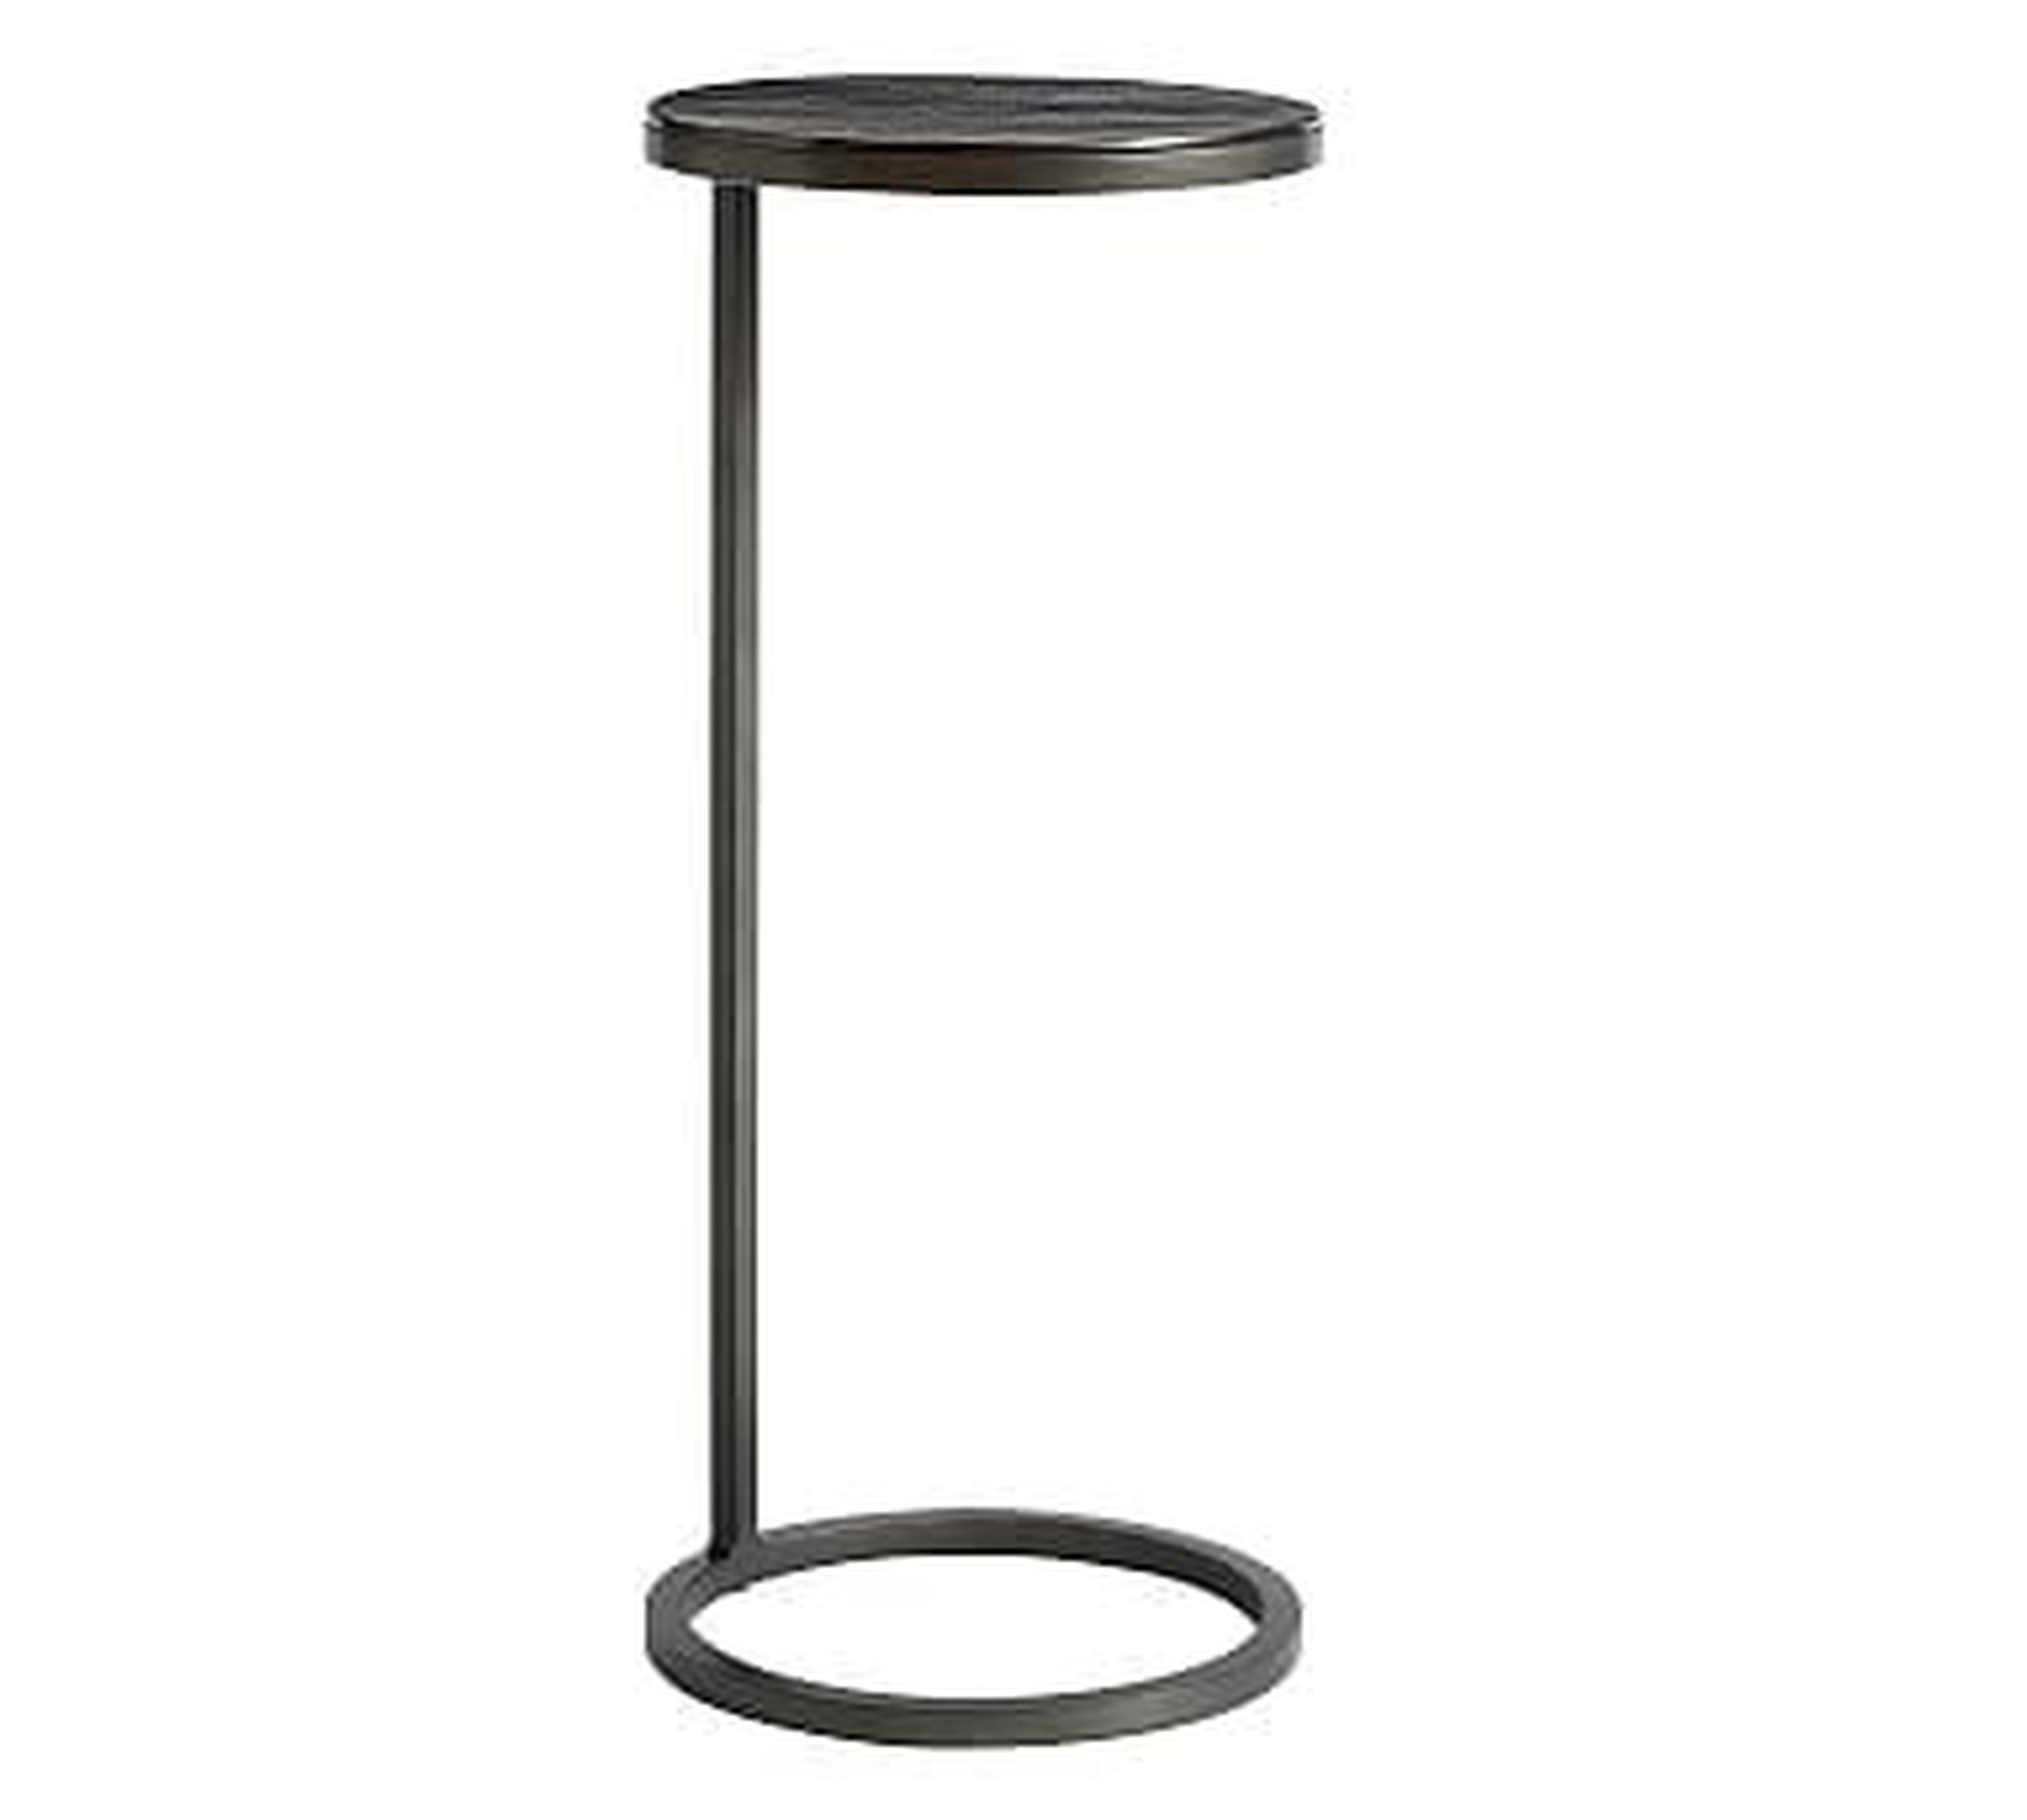 Duke Round Metal Accent Table, Bronze - Pottery Barn